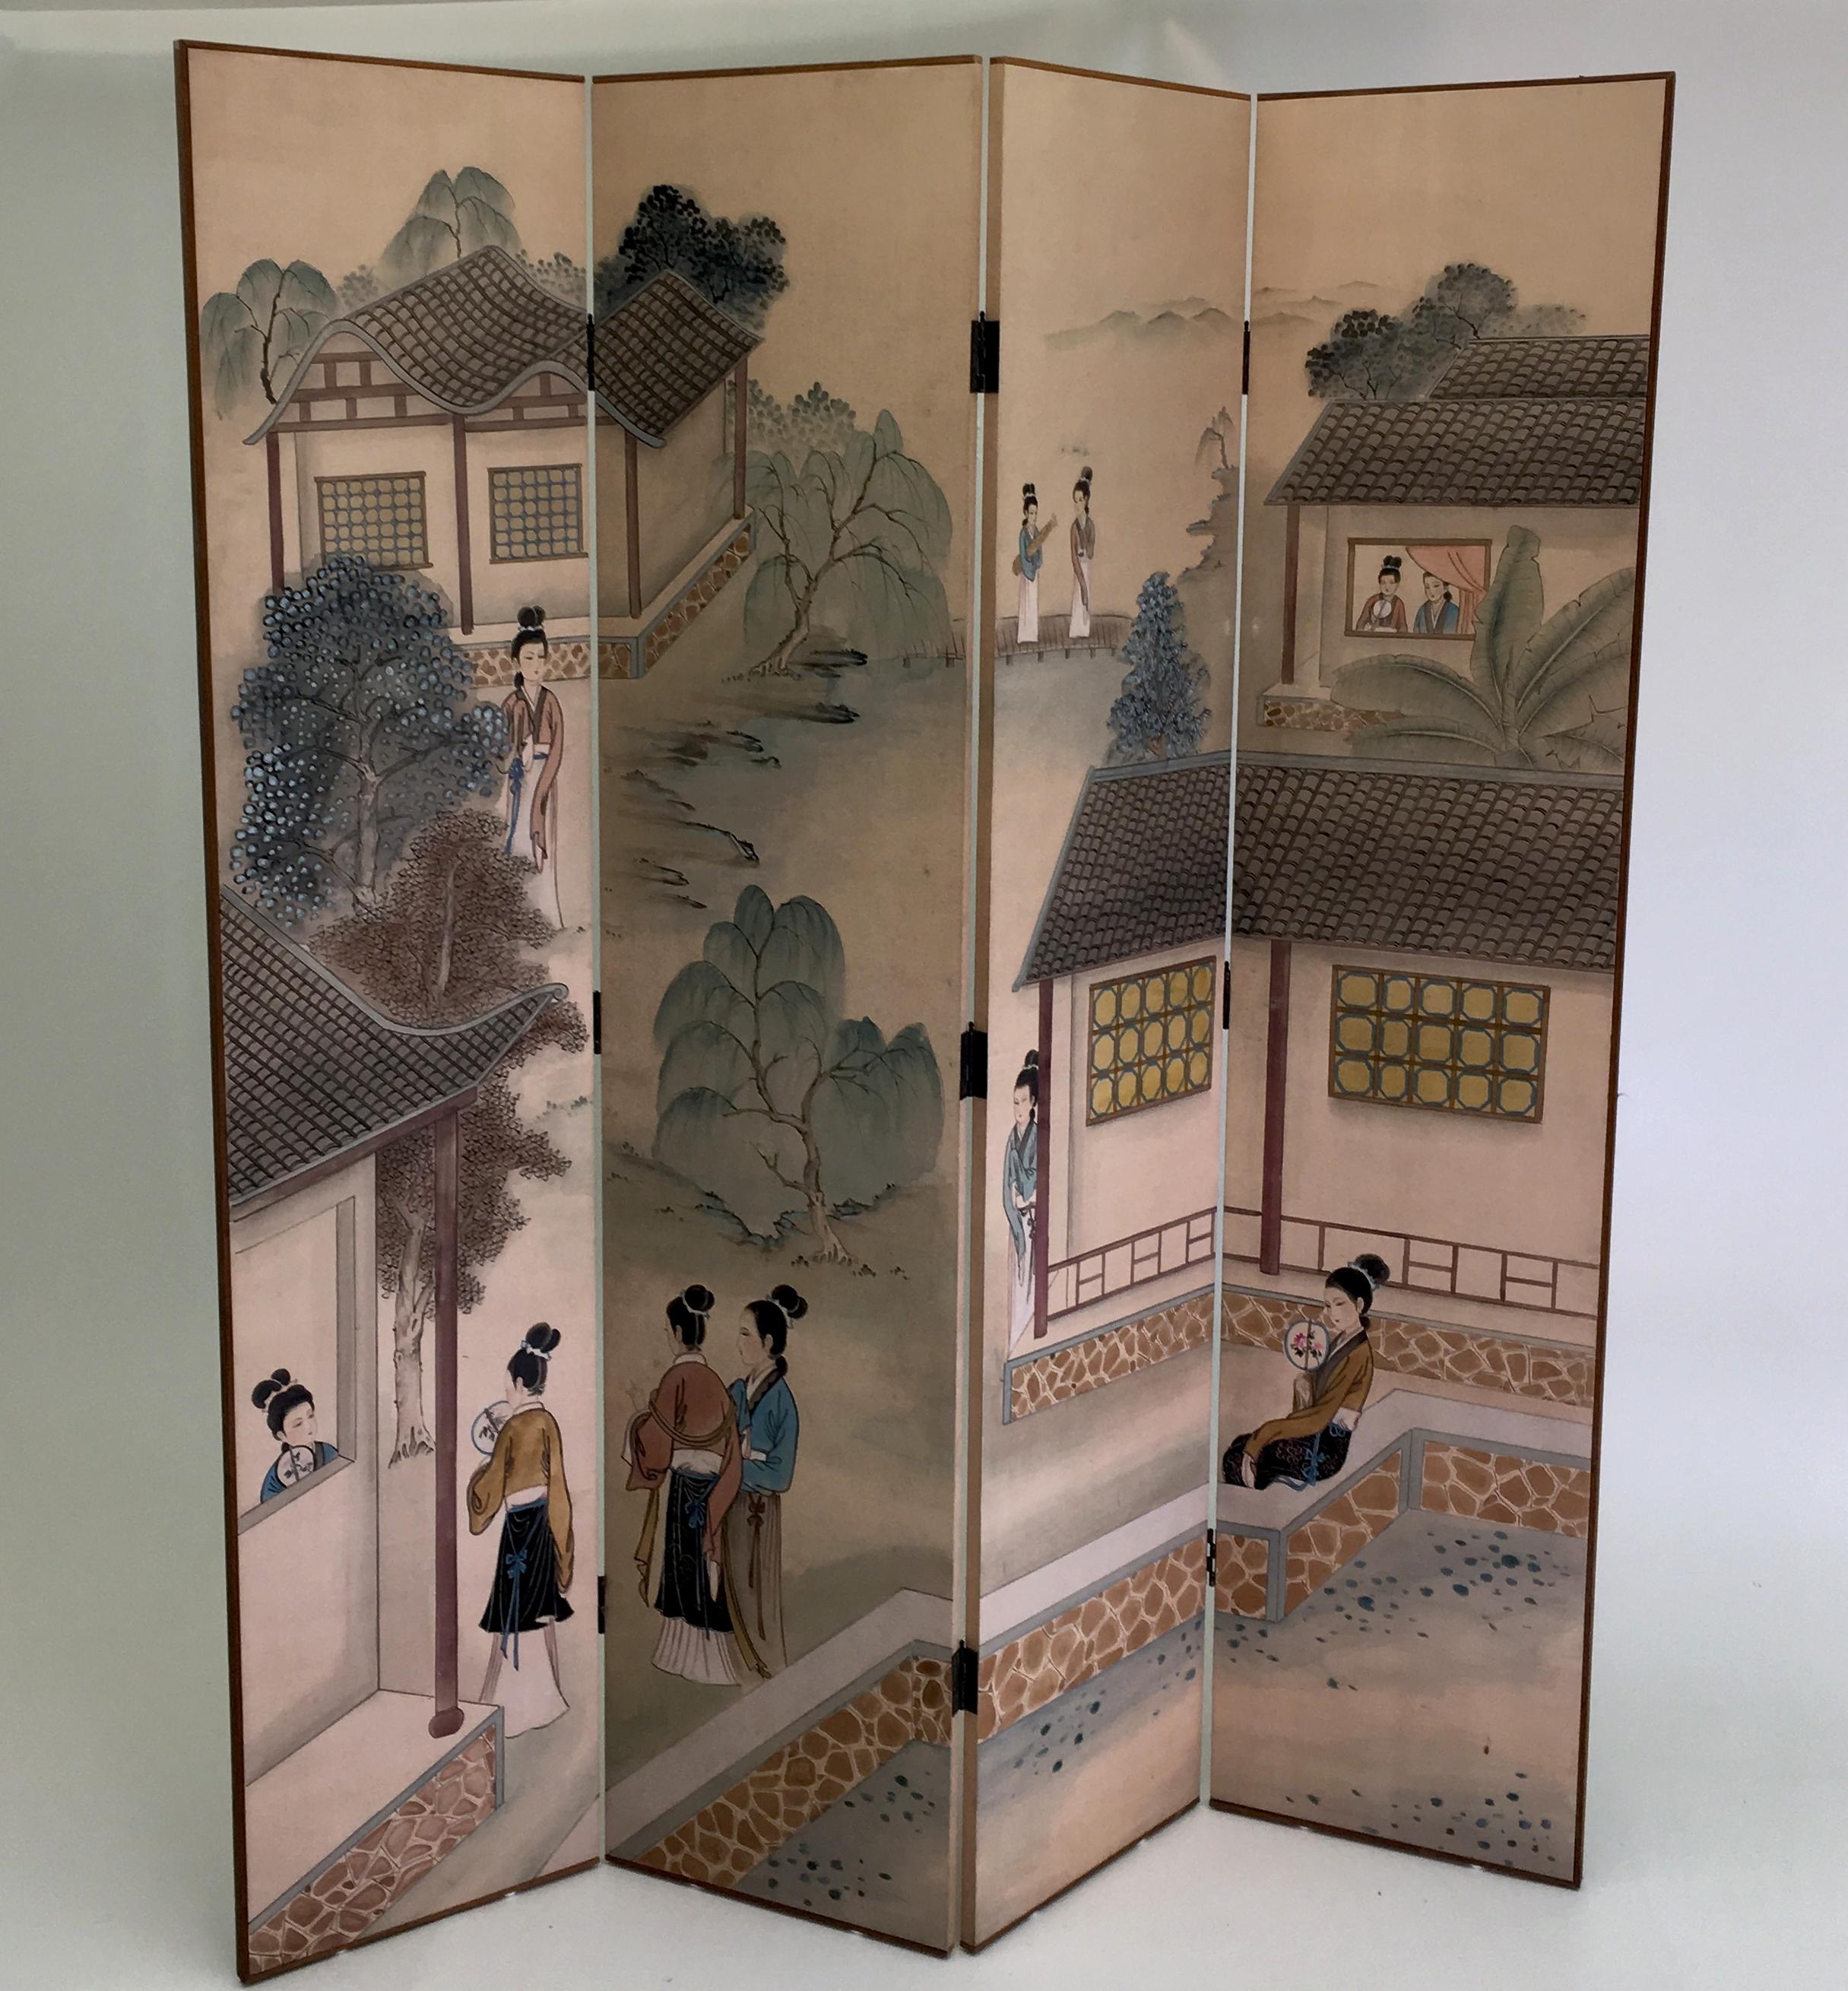 Maitland-Smith Ltd,
circa 1979, Hing Kong Production
Silk, painted, paper backed, walnut
Measures 62 wide x 72 tall. Each panel is 3/4